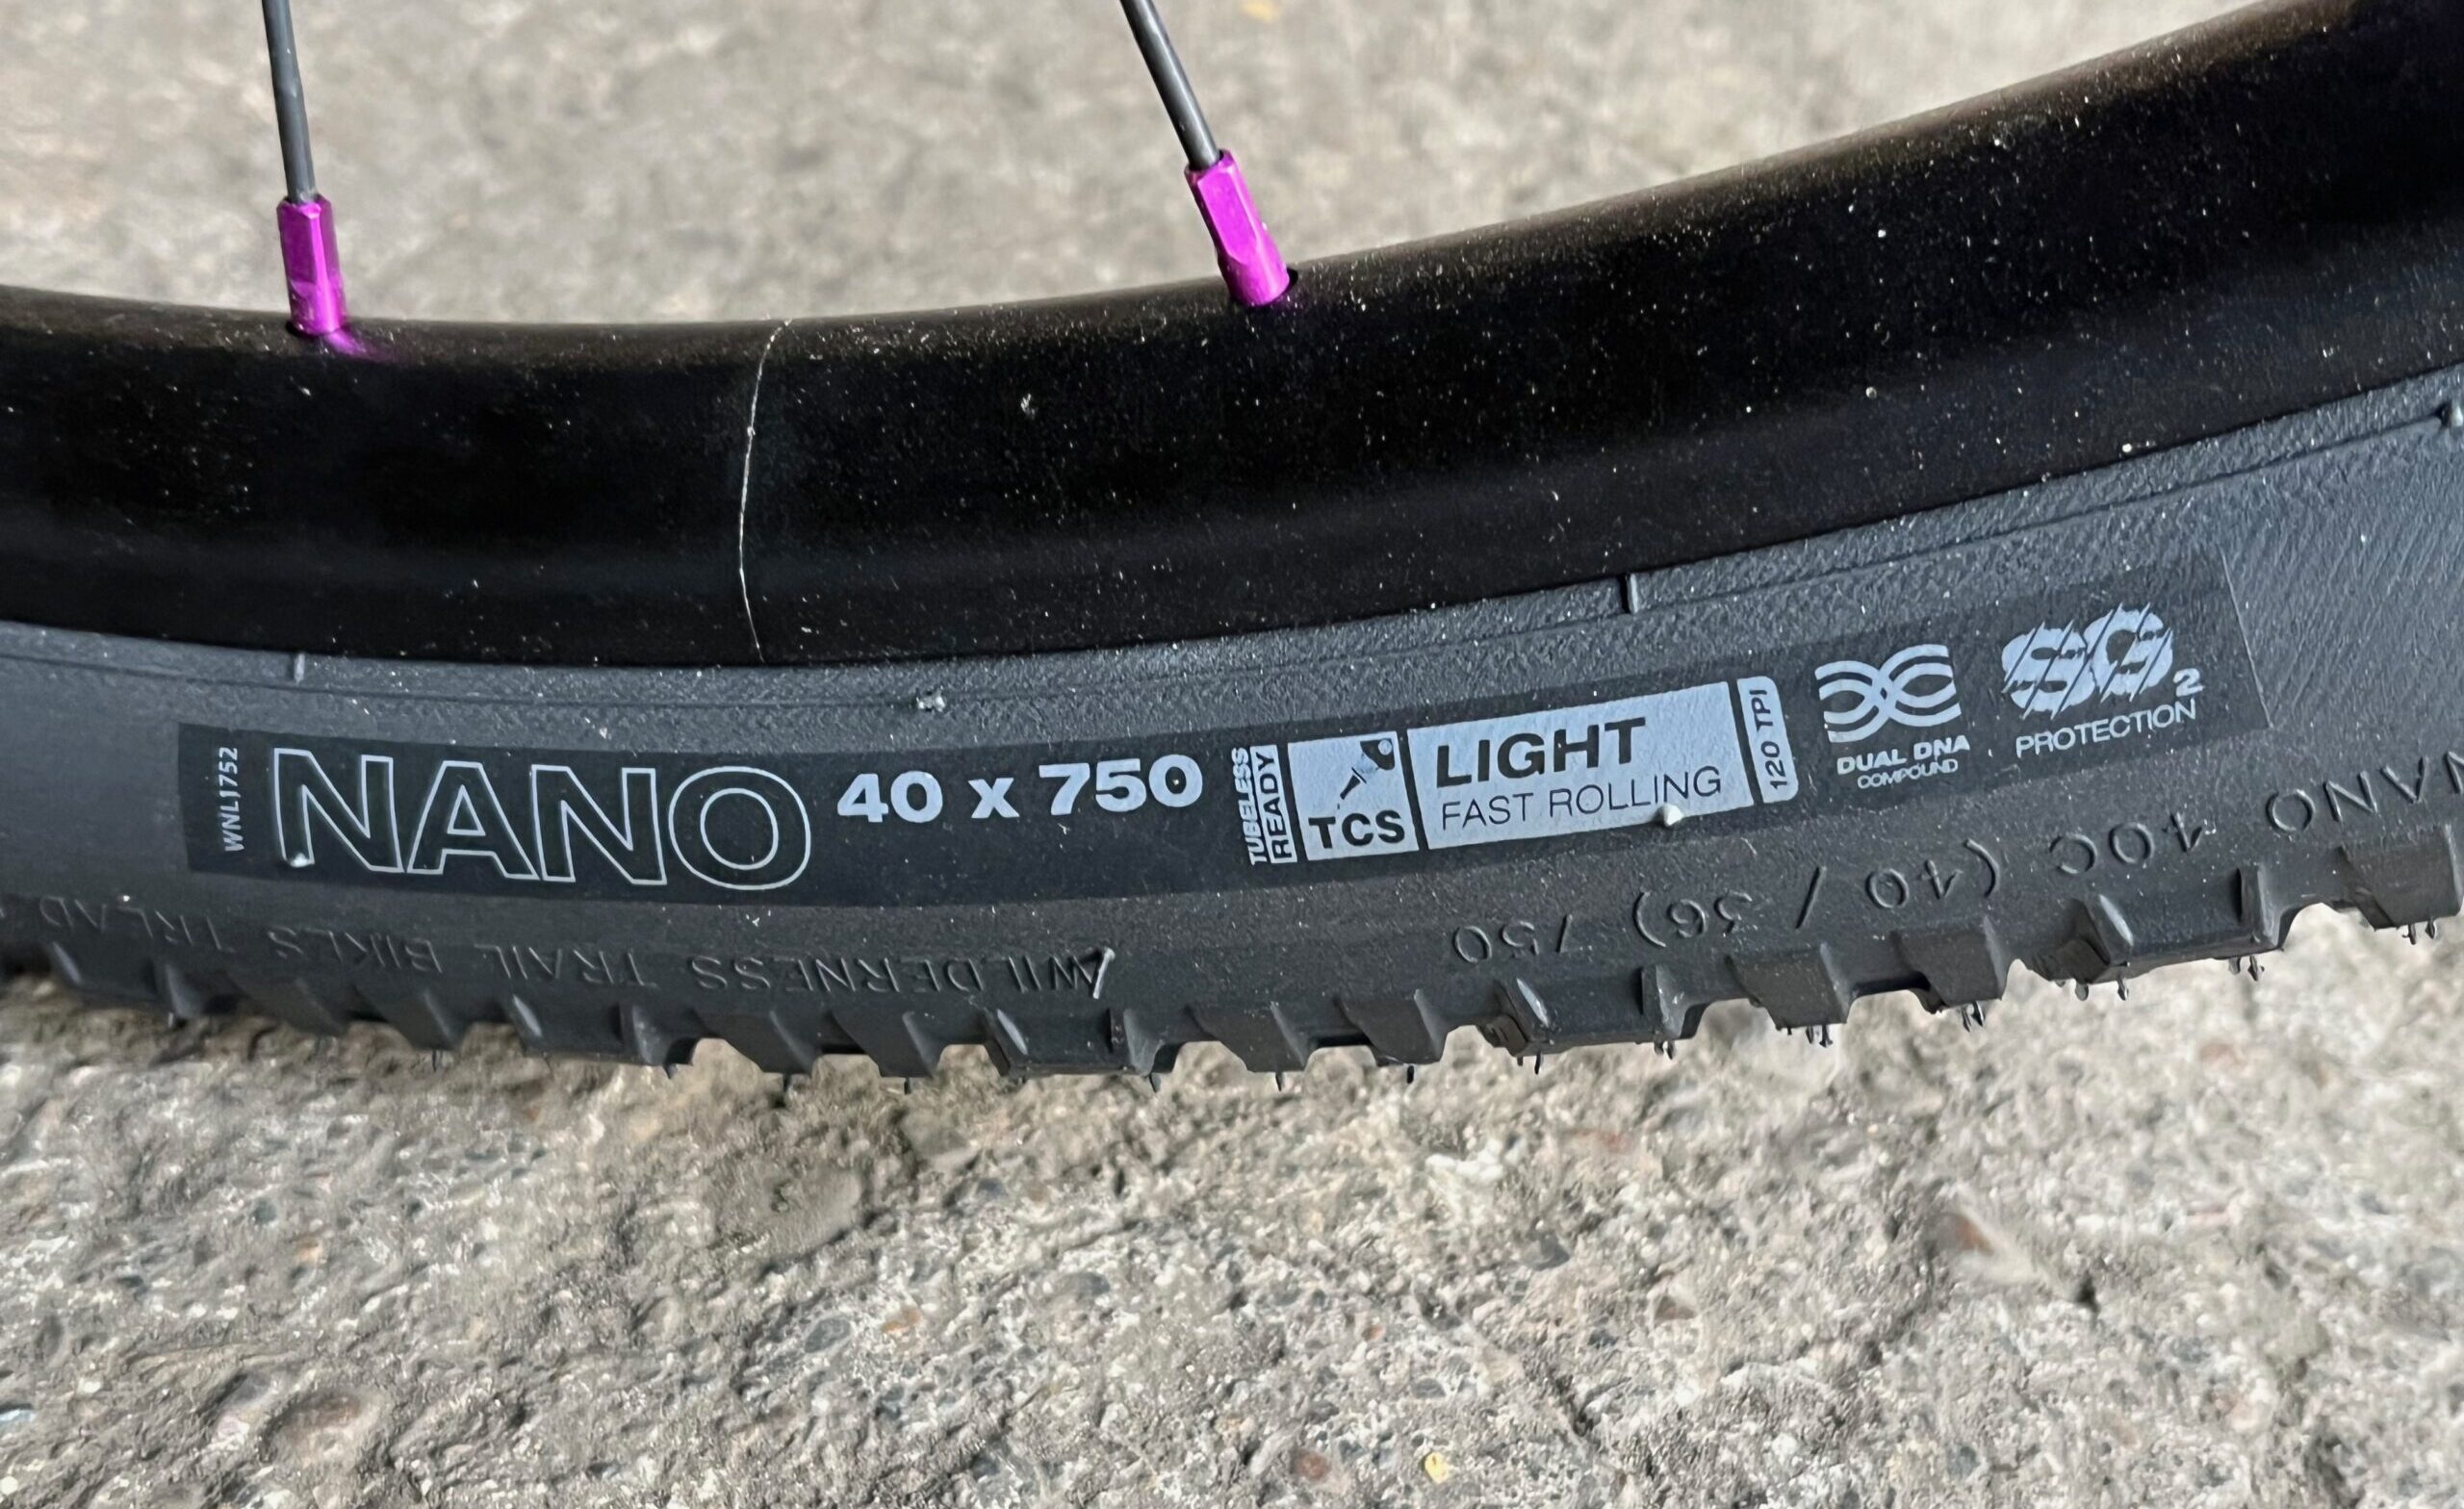 A New Wheel Size? Moots Prototype Debuts at MADE w/ 750d WTB Wheels & Tires  - Bikerumor